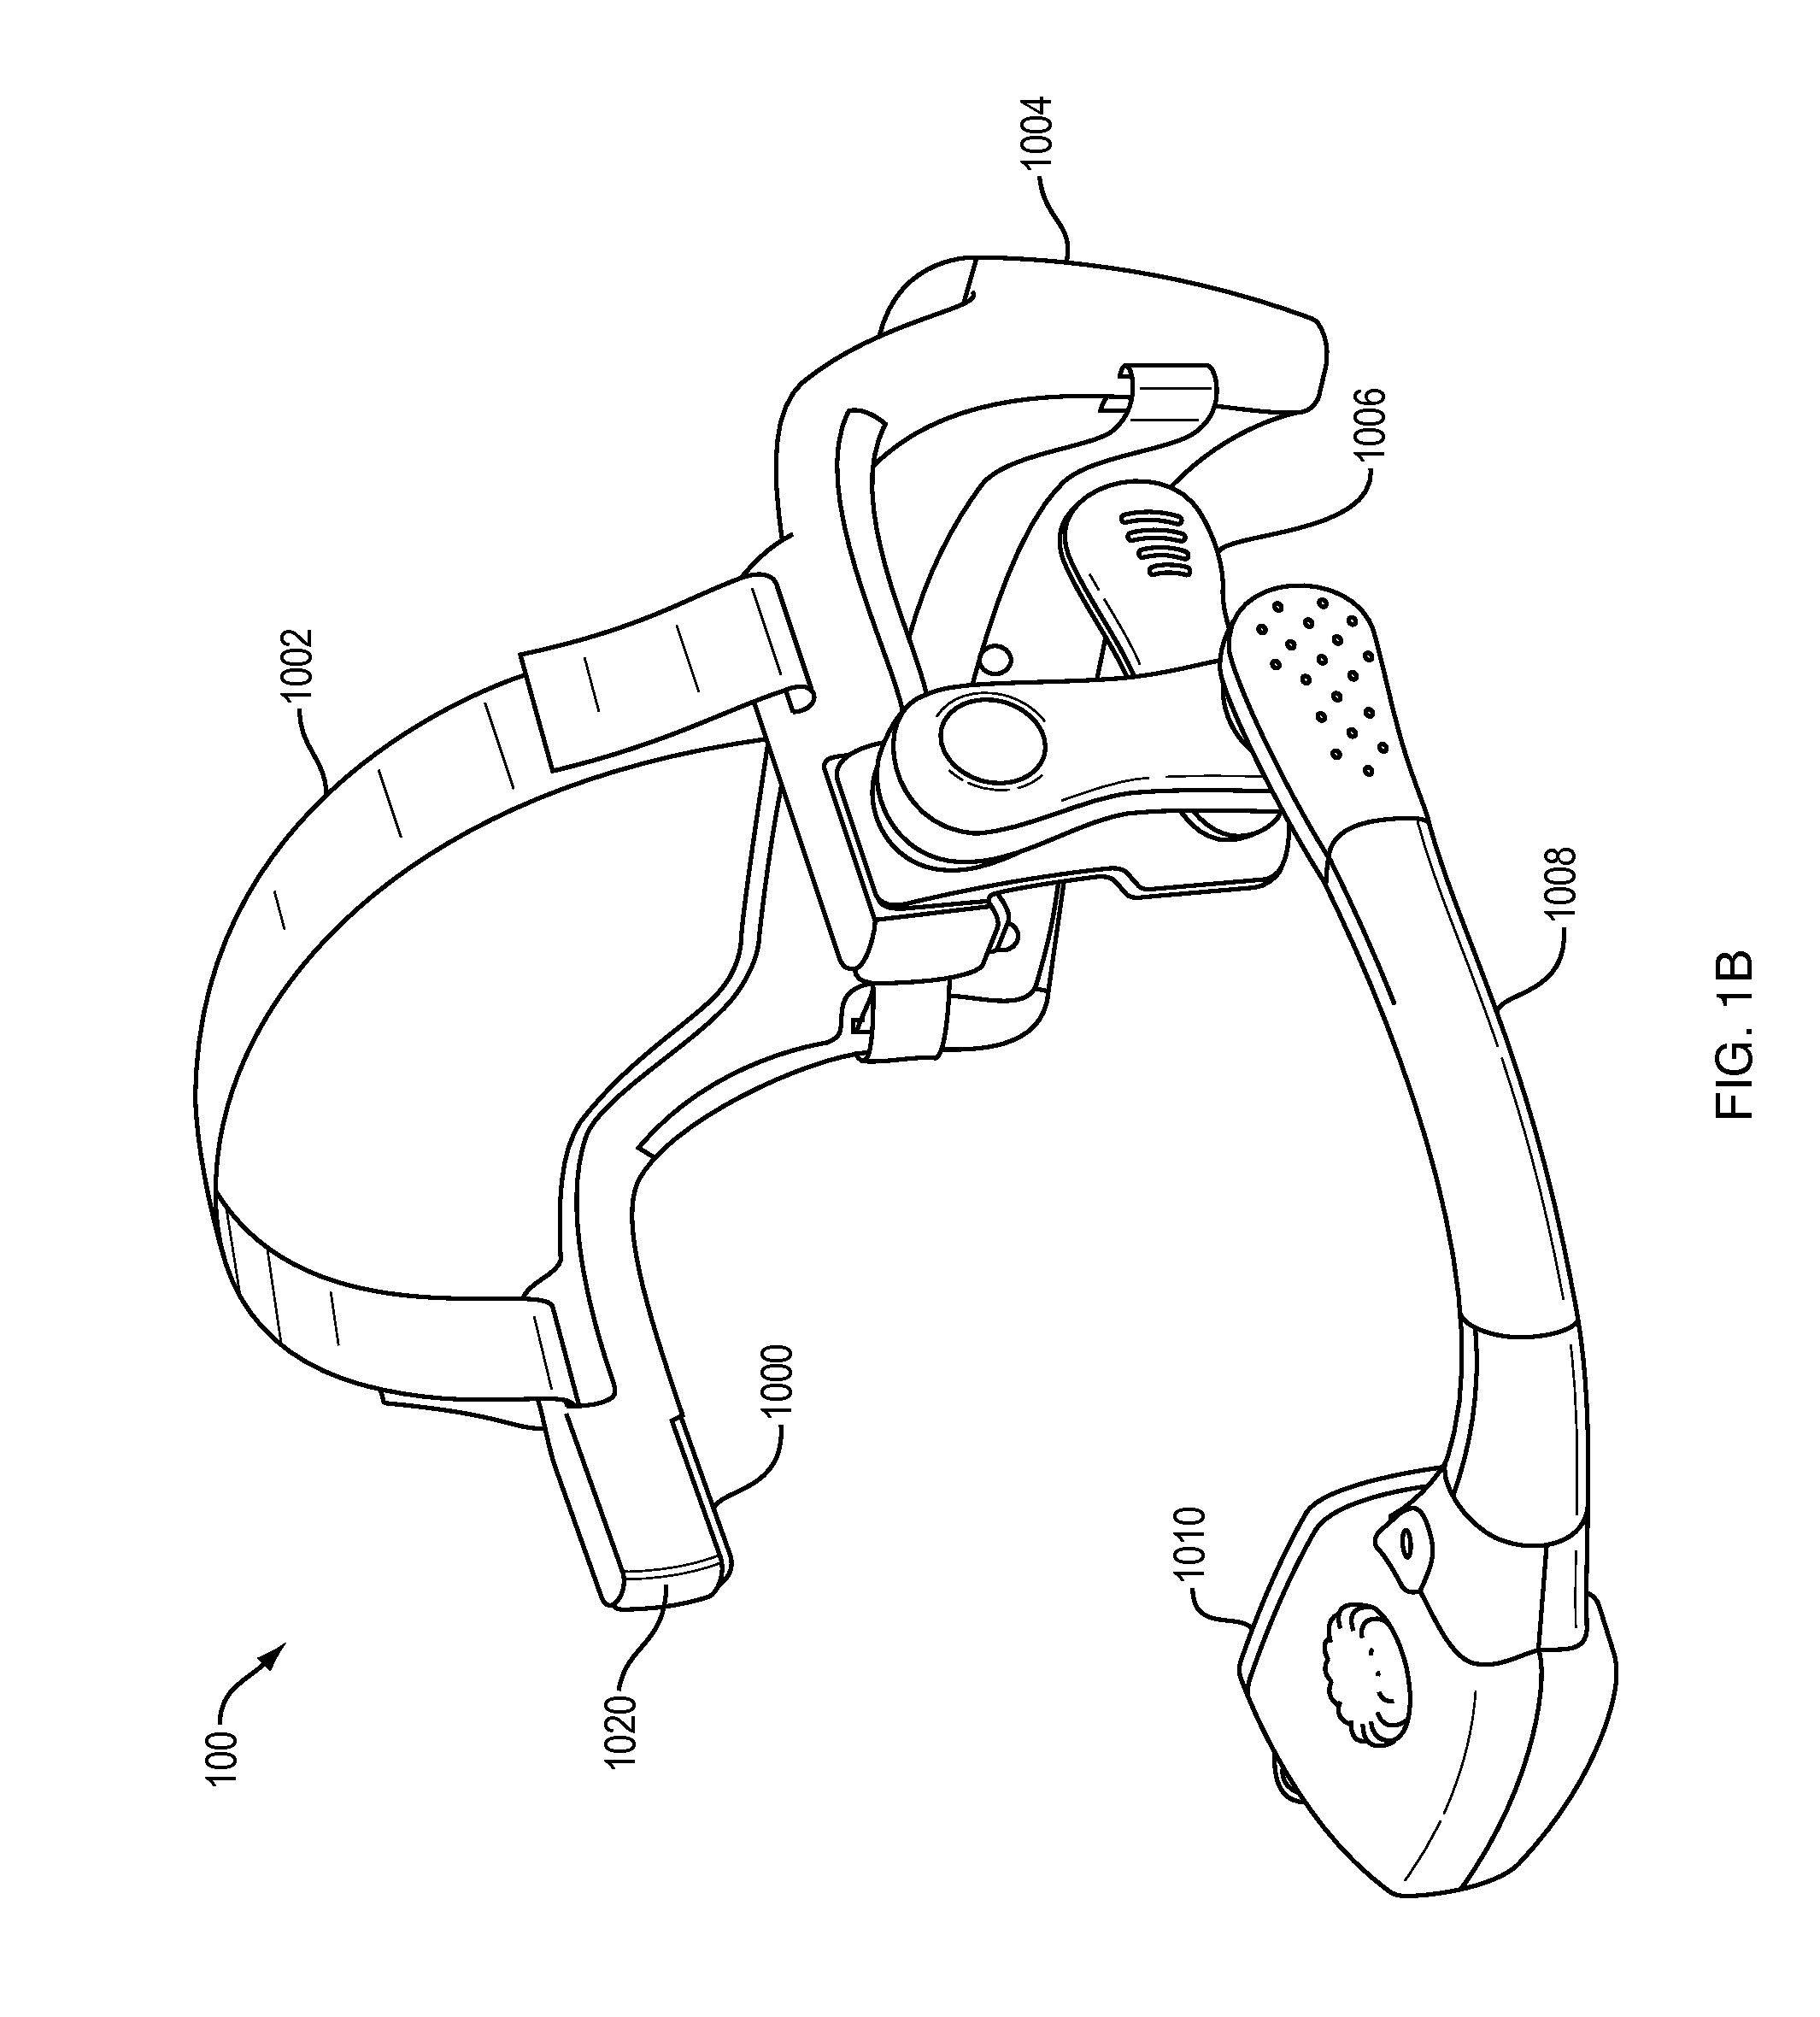 Digital Voice Processing Method and System for Headset Computer